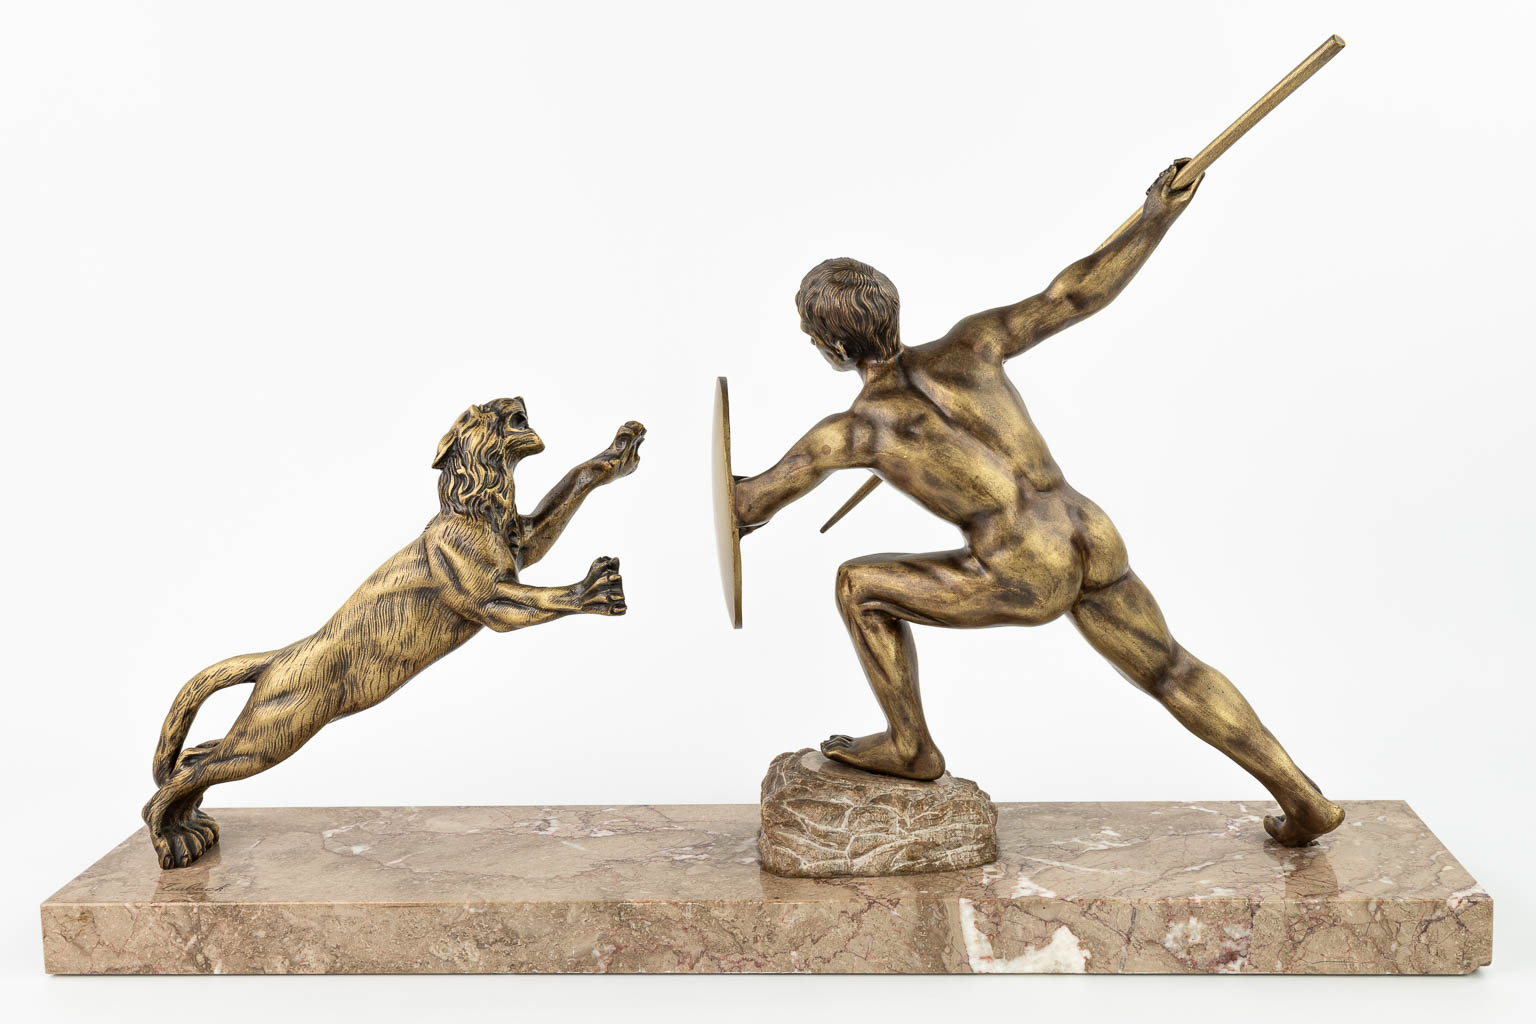 R. TUBACK (XIX-XX) 'Hunter with lion' an art deco statue made of bronze and mounted on a marble base. (H:46cm)